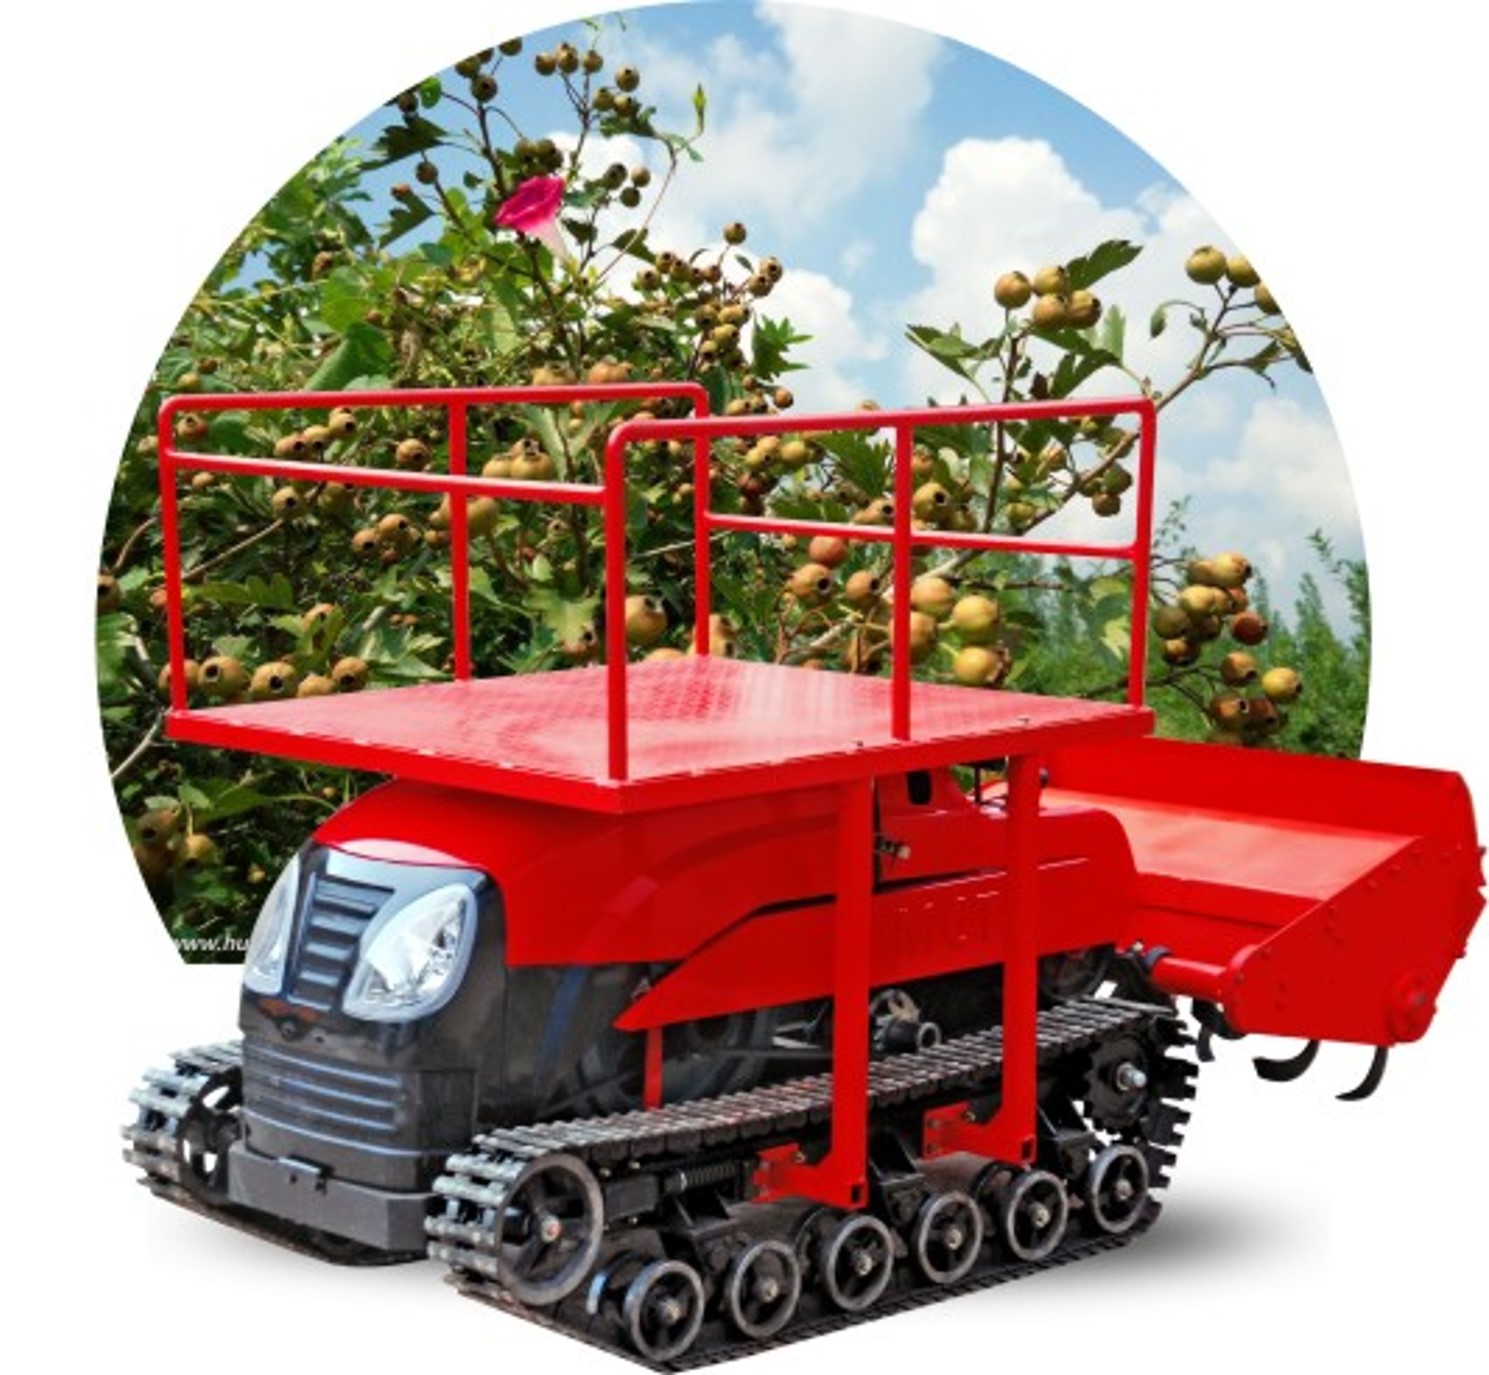 Crawler Orchard Tractor with Transporter